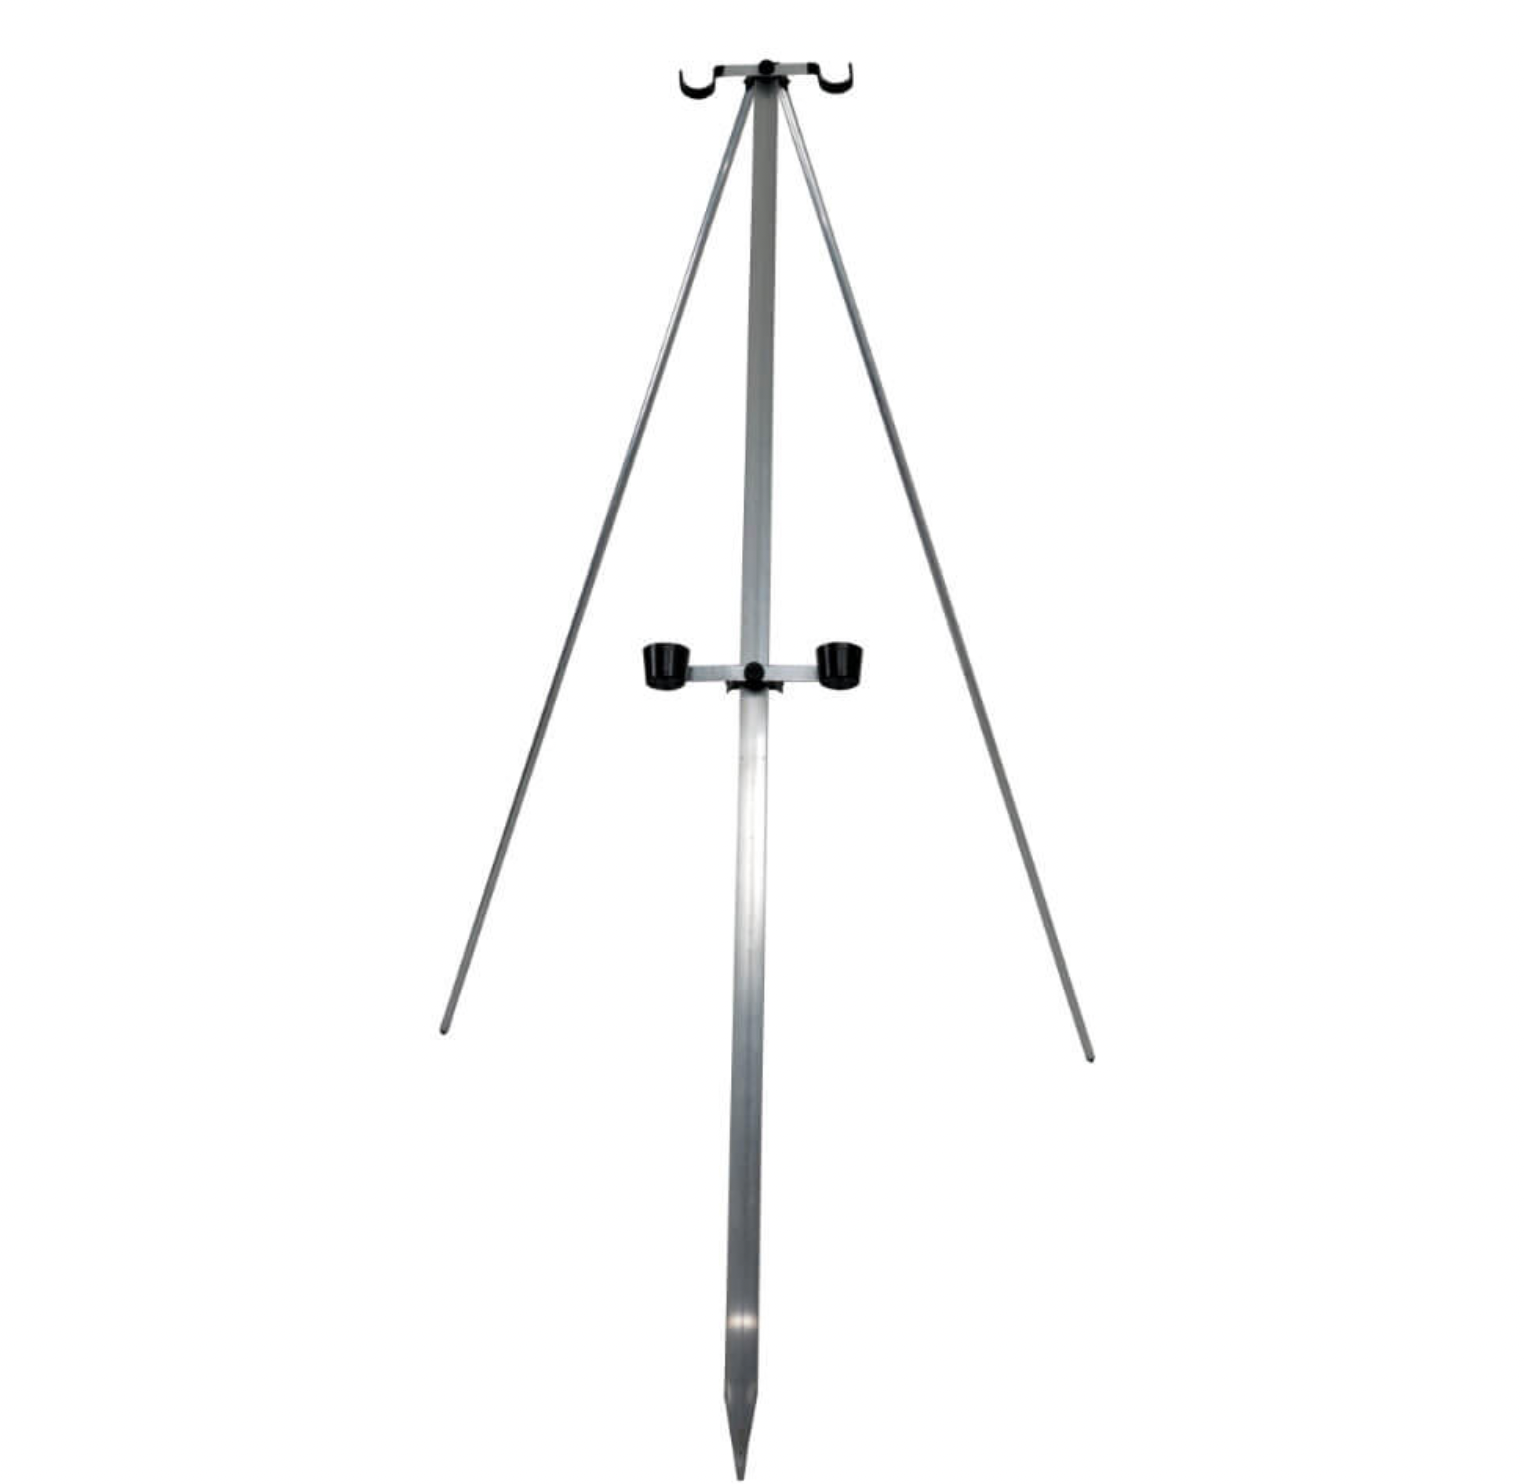 Tronixpro Match Fishing Double Rod Stands 1.8m For Beach Fishing